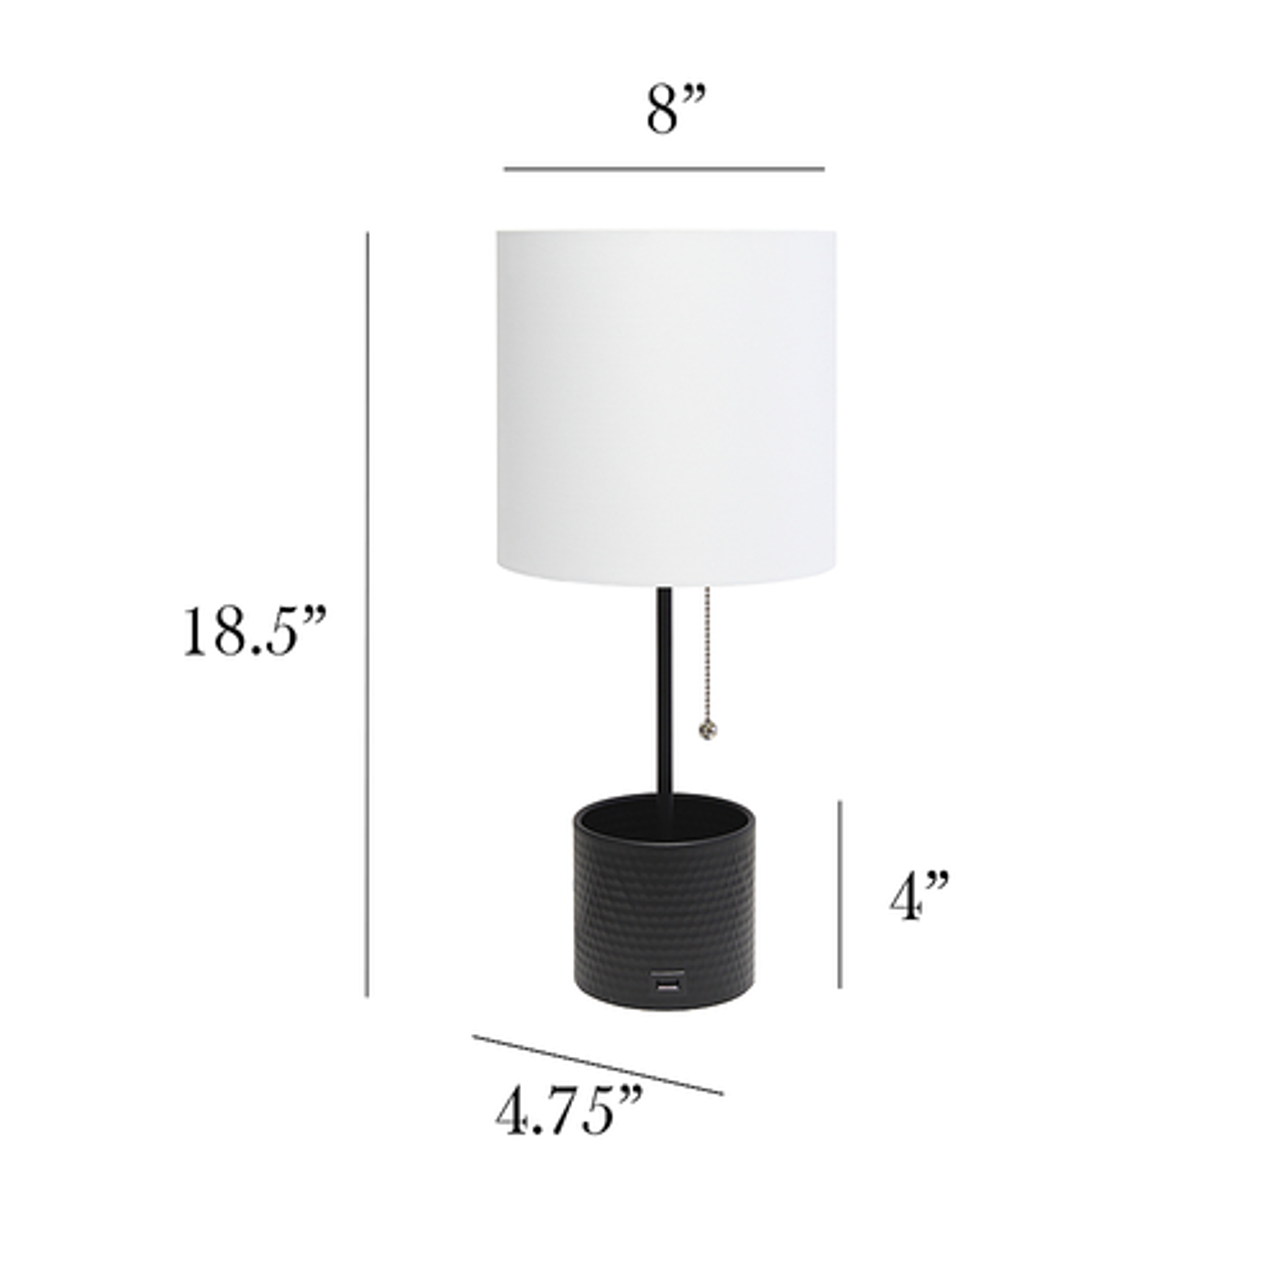 Simple Designs Hammered Metal Organizer Table Lamp with USB charging port and Fabric Shade, Black - Black base/White shade